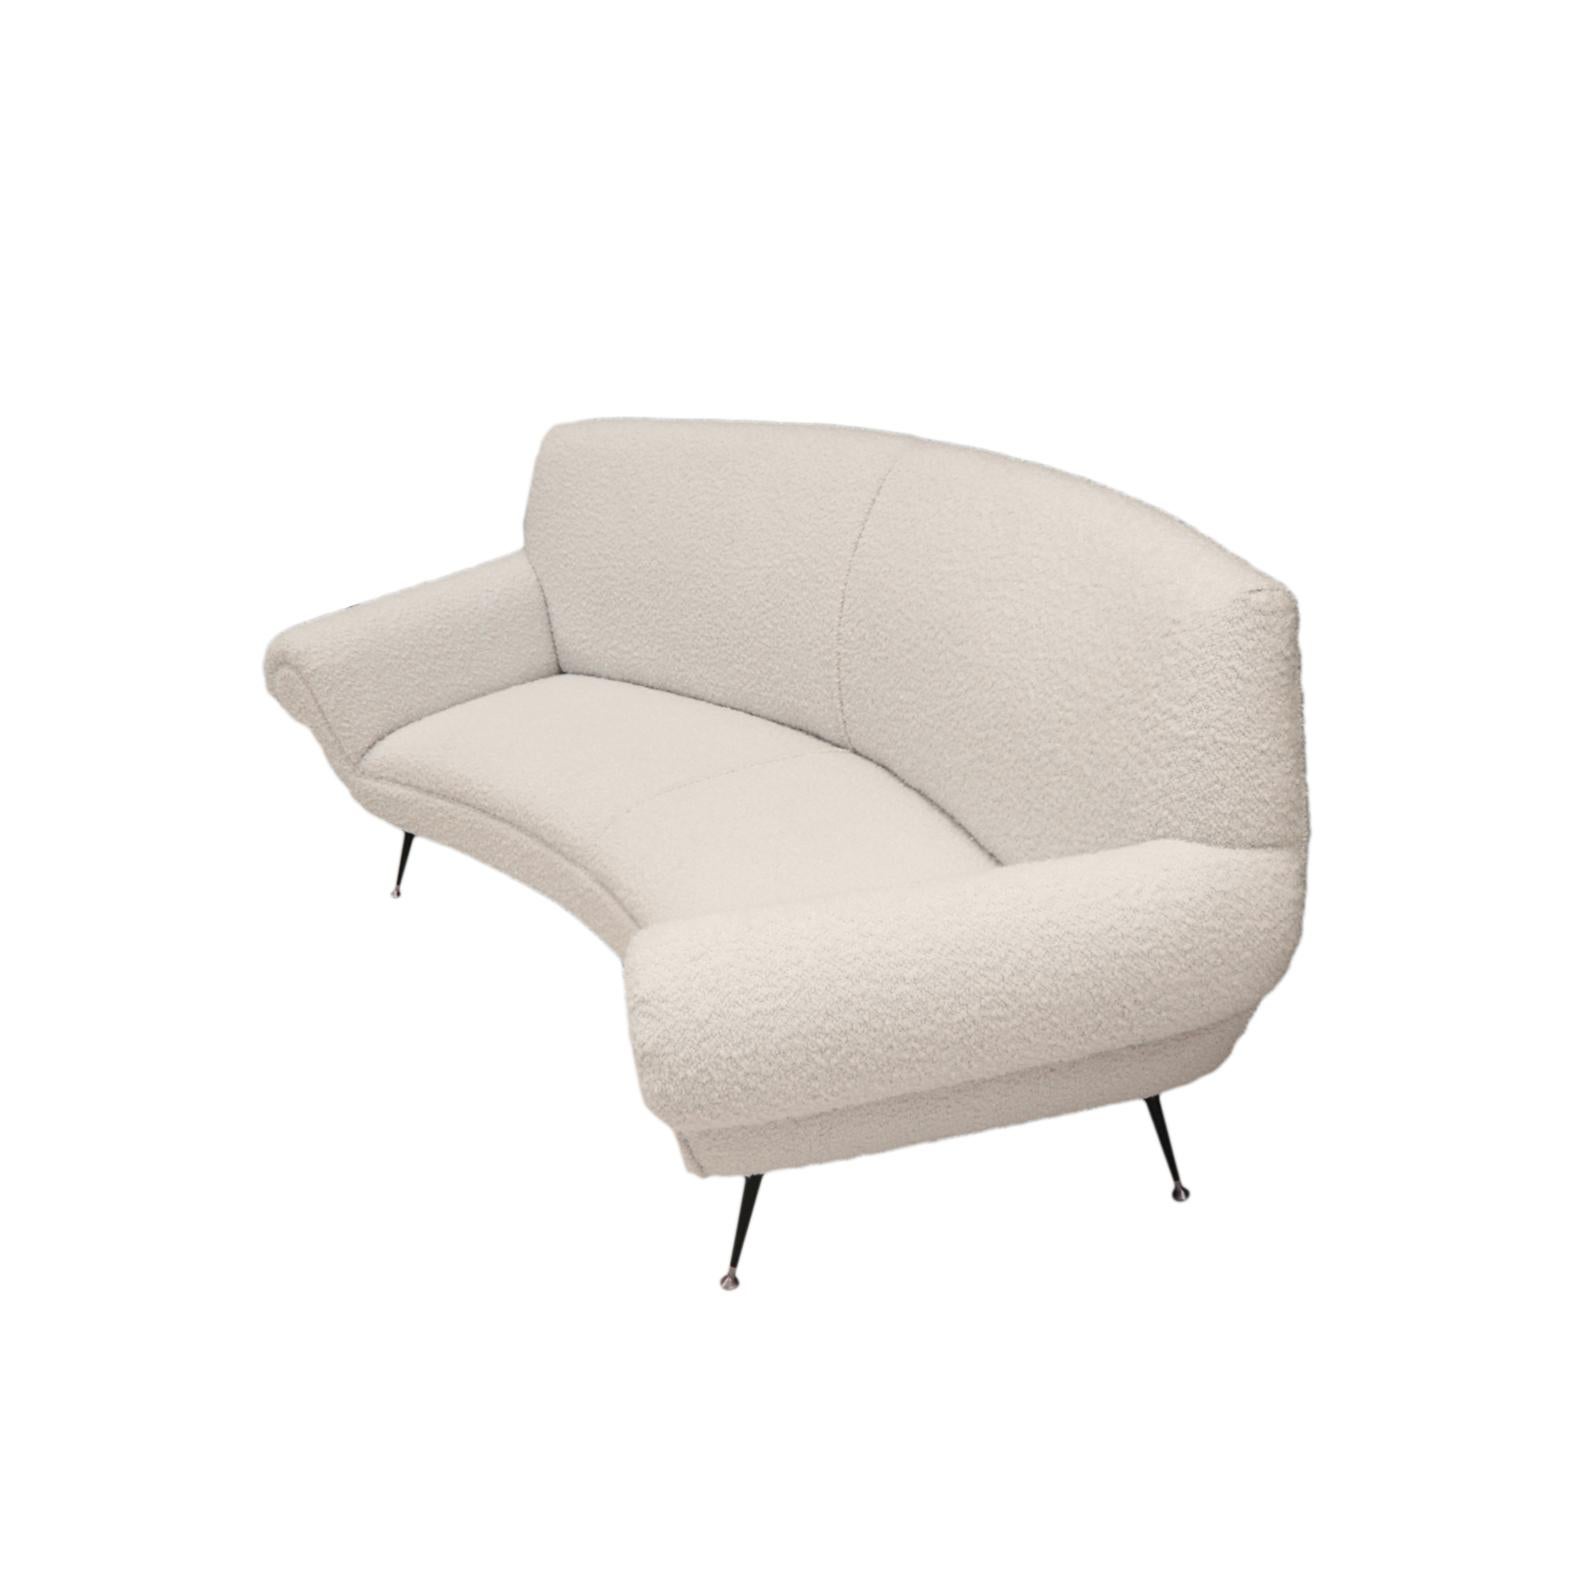 The white bouclé sofa designed by the renowned Italian designer Gigi Radice and produced by Minotti showcases the perfect blend of craftsmanship and contemporary design. Radice, known for his iconic contributions to mid-century modern furniture, was